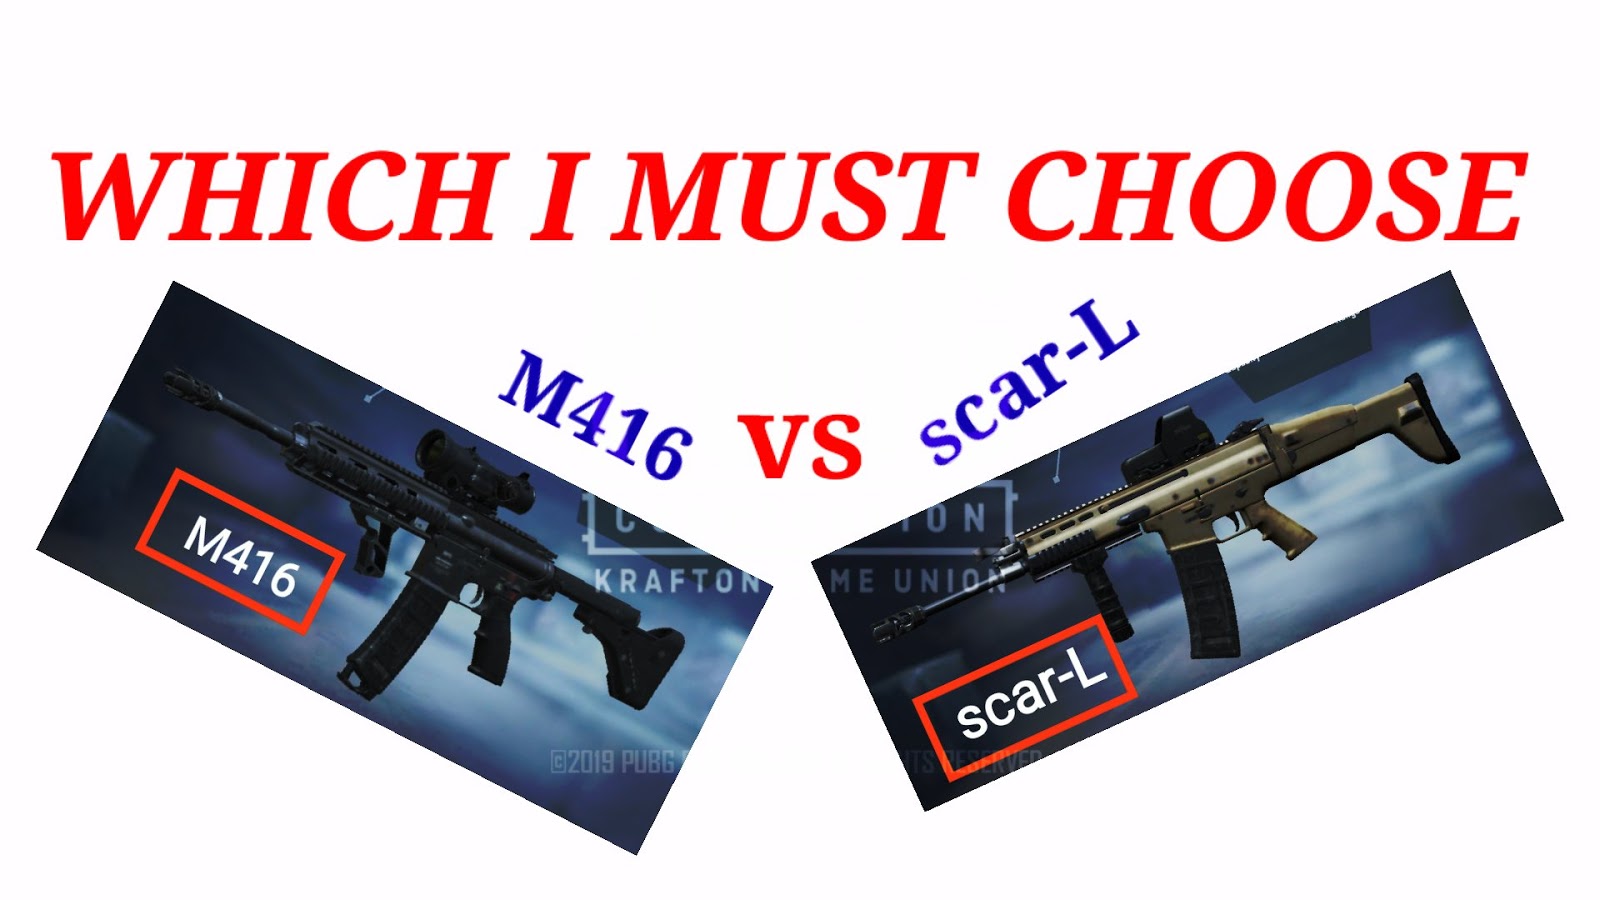 M416 Vs Scar L Why And Which Is Better Smartygamer